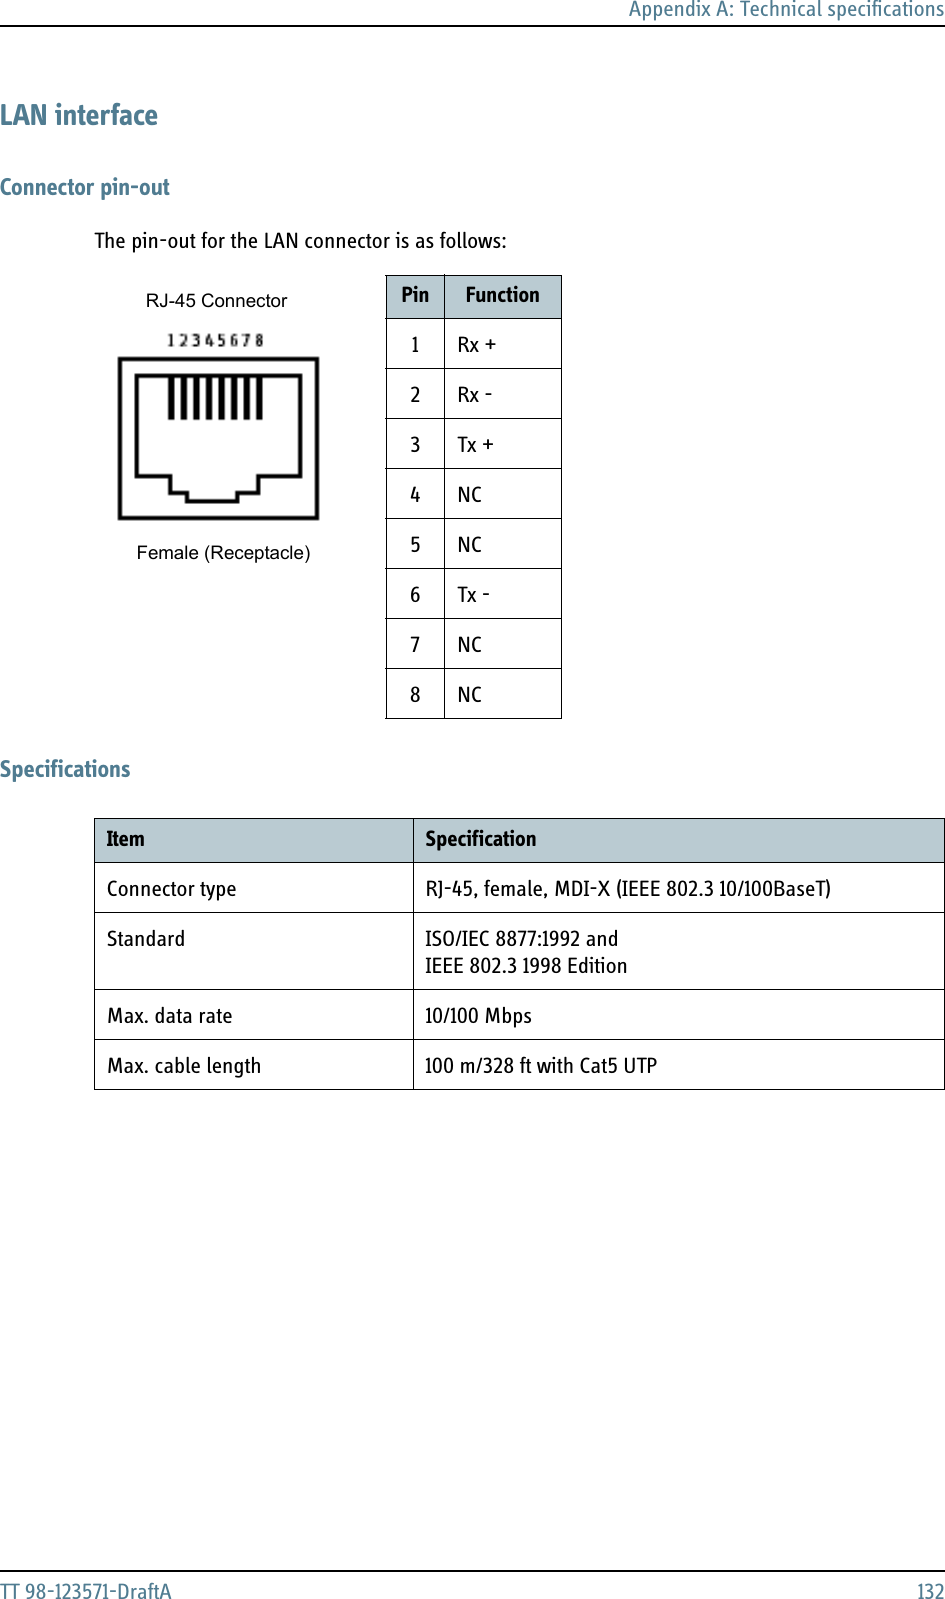 Appendix A: Technical specificationsTT 98-123571-DraftA 132LAN interfaceConnector pin-outThe pin-out for the LAN connector is as follows:SpecificationsPin Function1Rx +2Rx -3Tx +4NC5NC6Tx -7NC8NCRJ-45 ConnectorFemale (Receptacle)Item SpecificationConnector type RJ-45, female, MDI-X (IEEE 802.3 10/100BaseT)Standard ISO/IEC 8877:1992 and IEEE 802.3 1998 EditionMax. data rate 10/100 MbpsMax. cable length 100 m/328 ft with Cat5 UTP